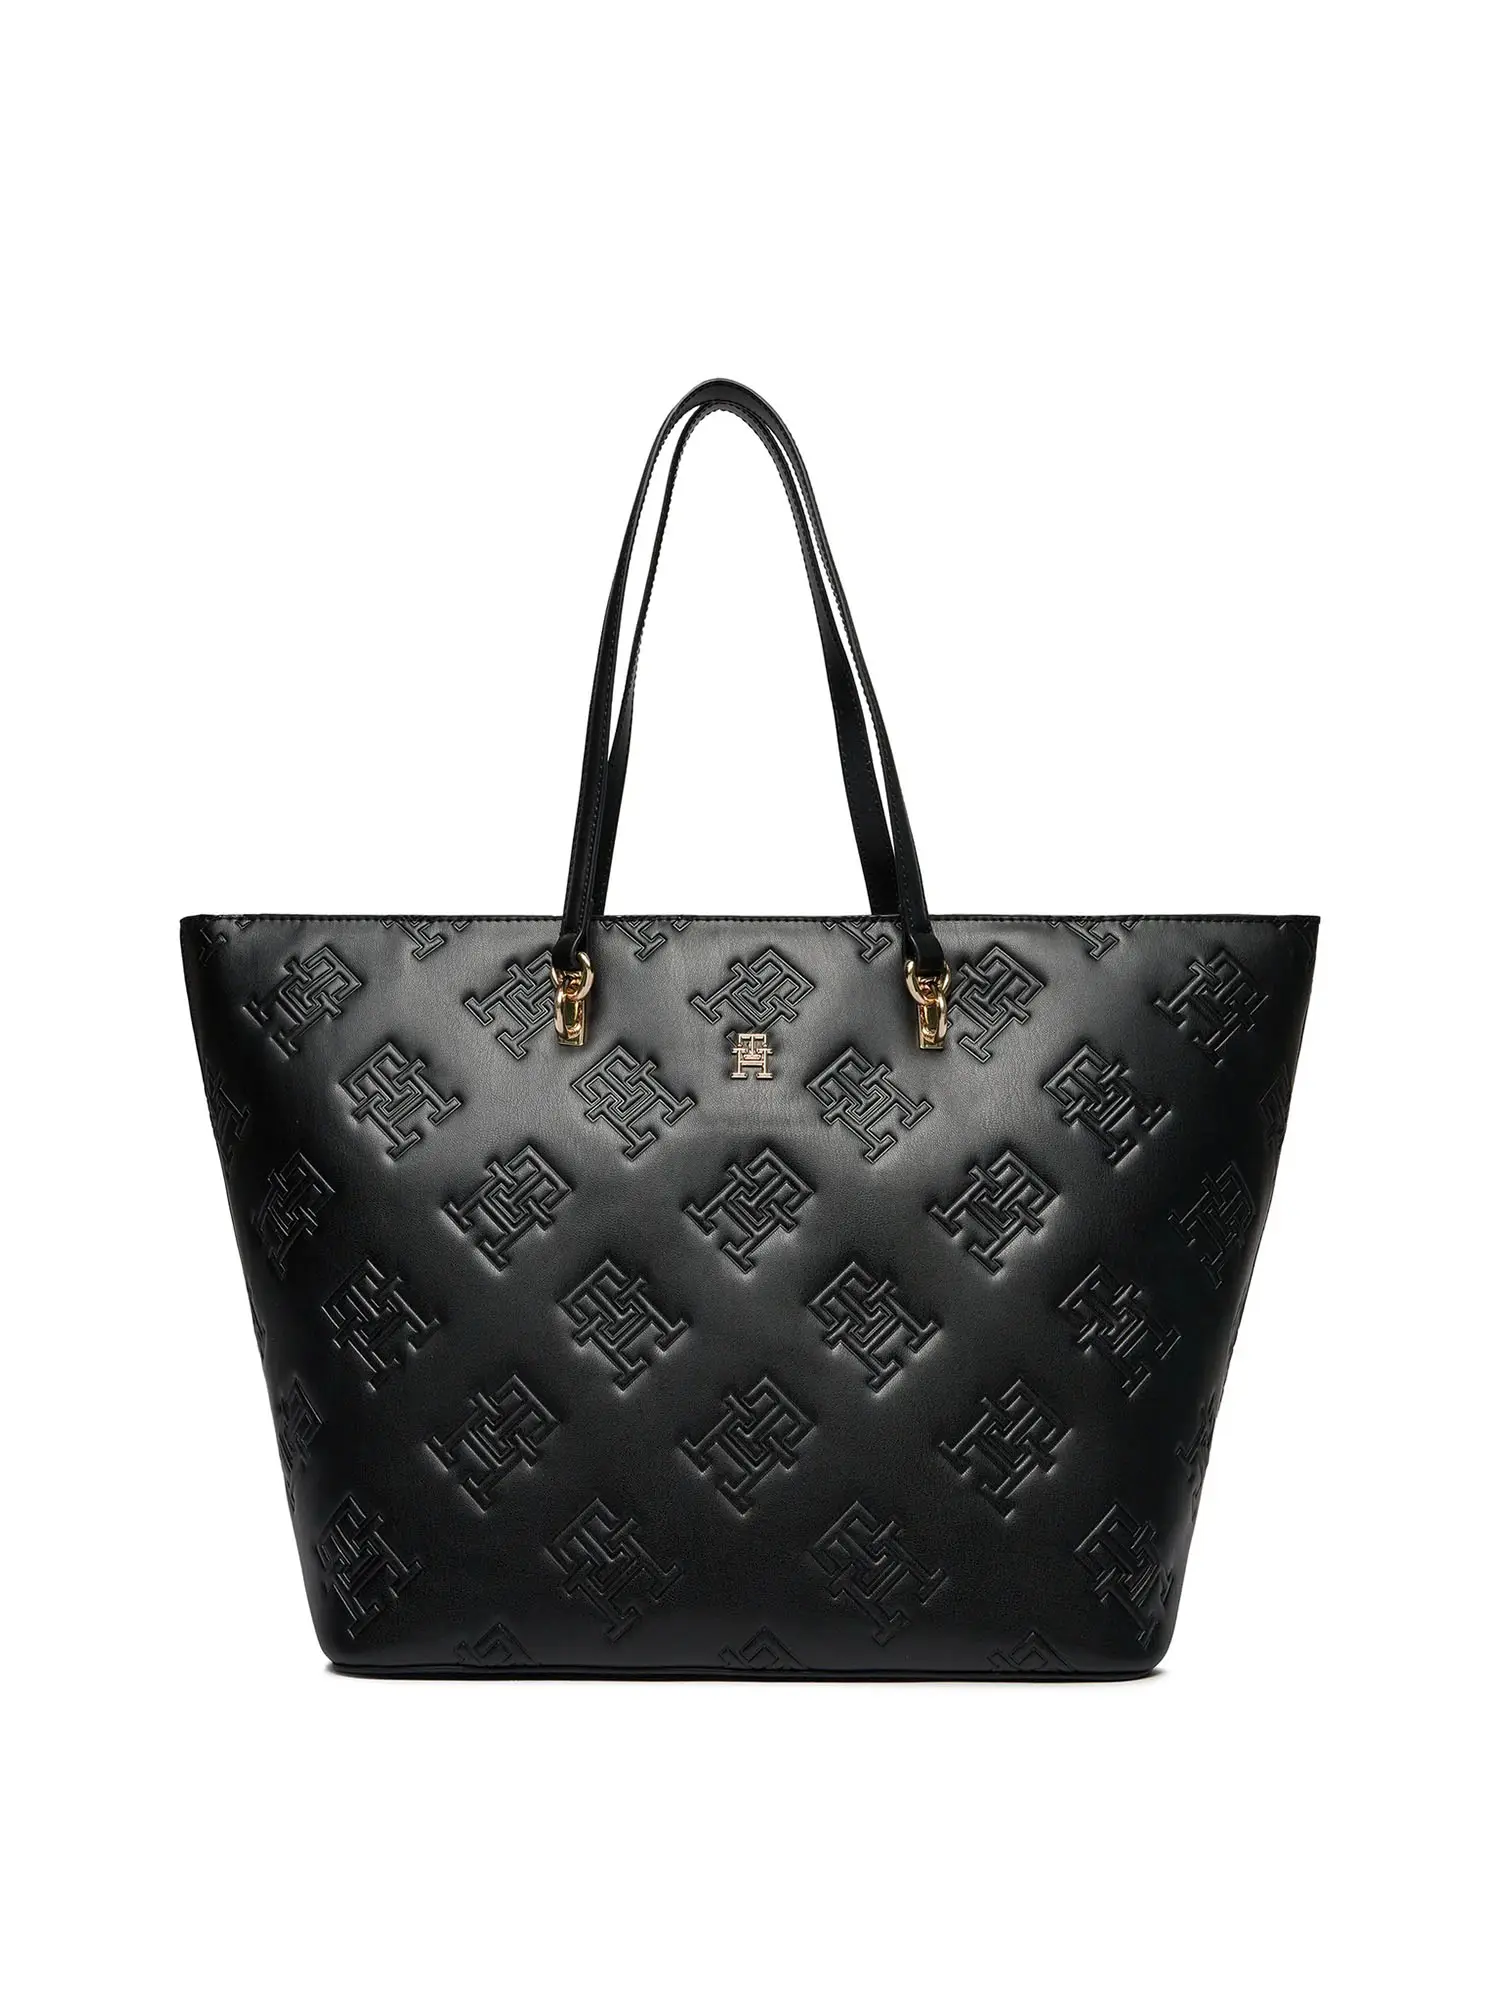 TOTE DONNA - TOMMY HILFIGER - AW0AW15726 - NERO, UNICA